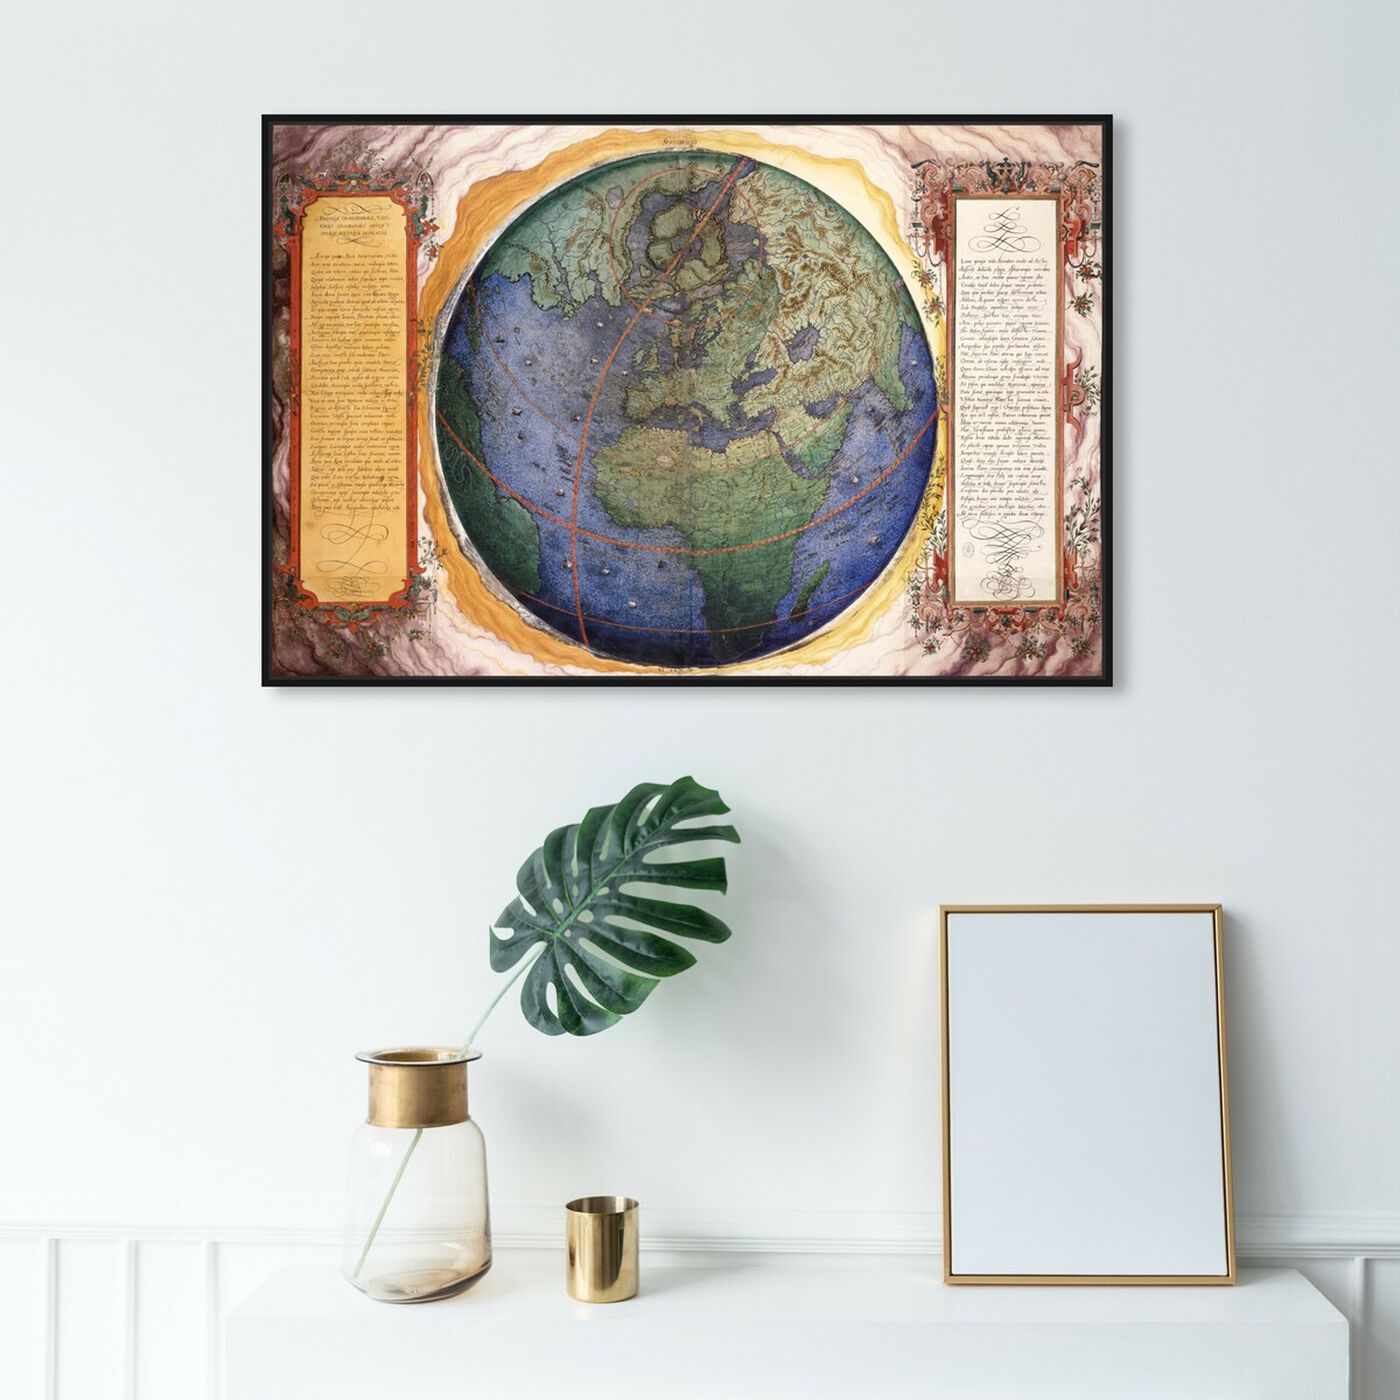 Hanging view of Prioris Hemisphaerii featuring maps and flags and world maps art.